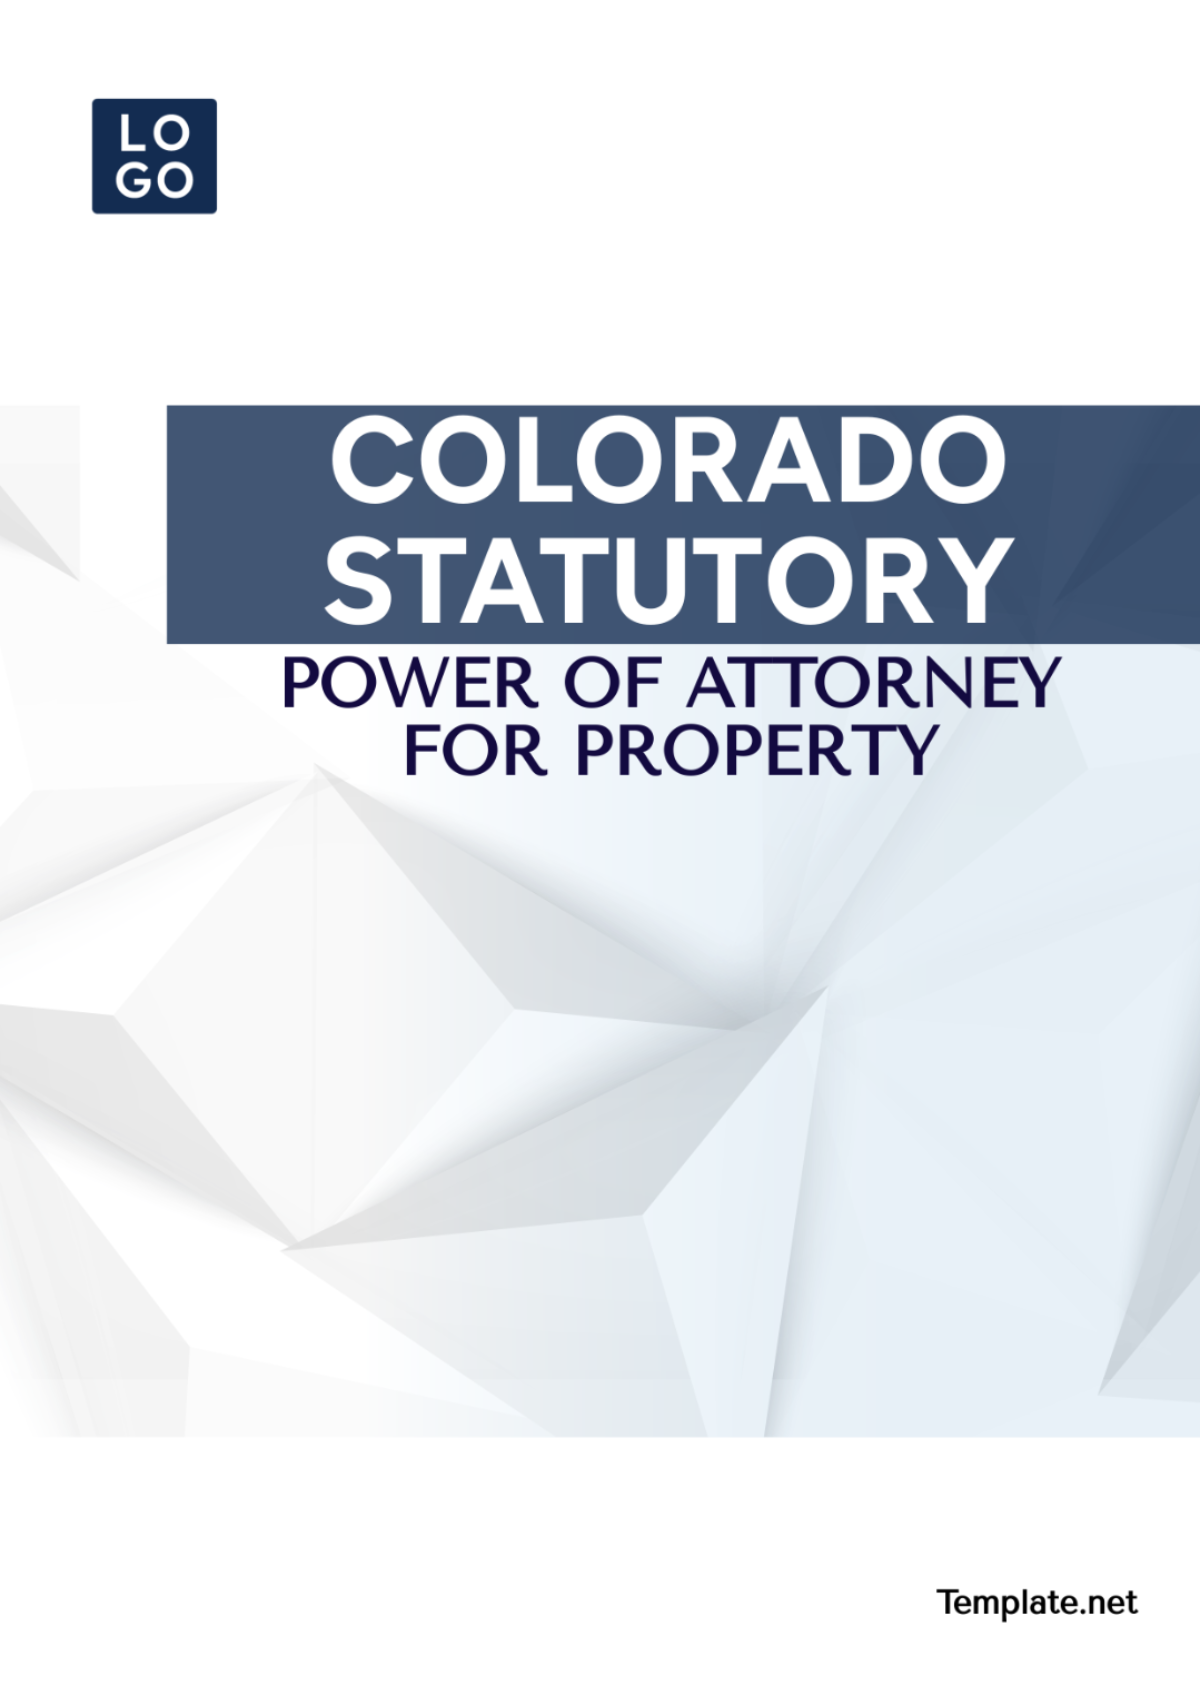 Free Colorado Statutory Power of Attorney For Property Template